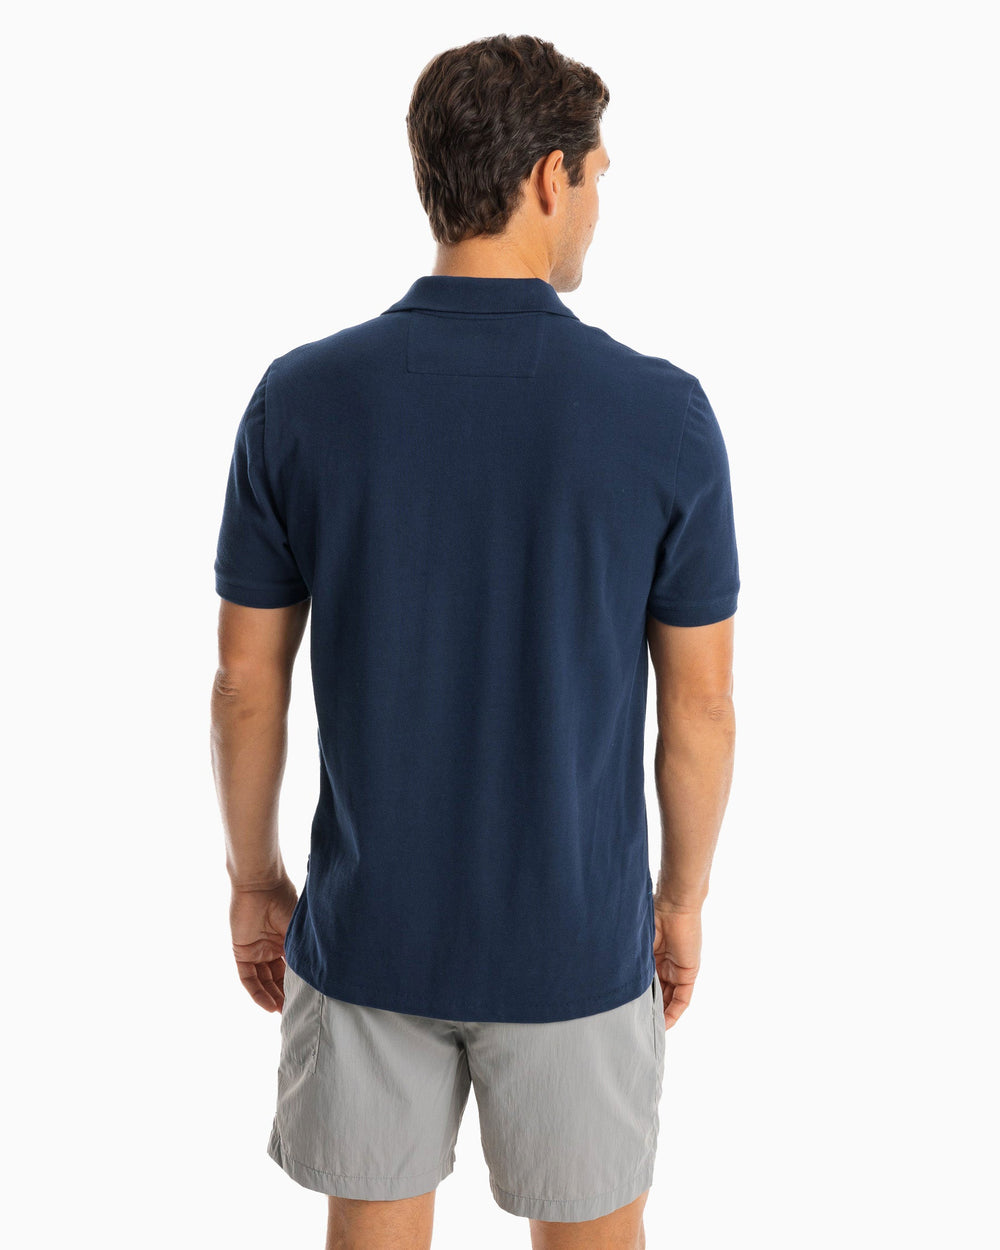 The model back view of the Men's New Skipjack Polo Shirt by Southern Tide - True Navy